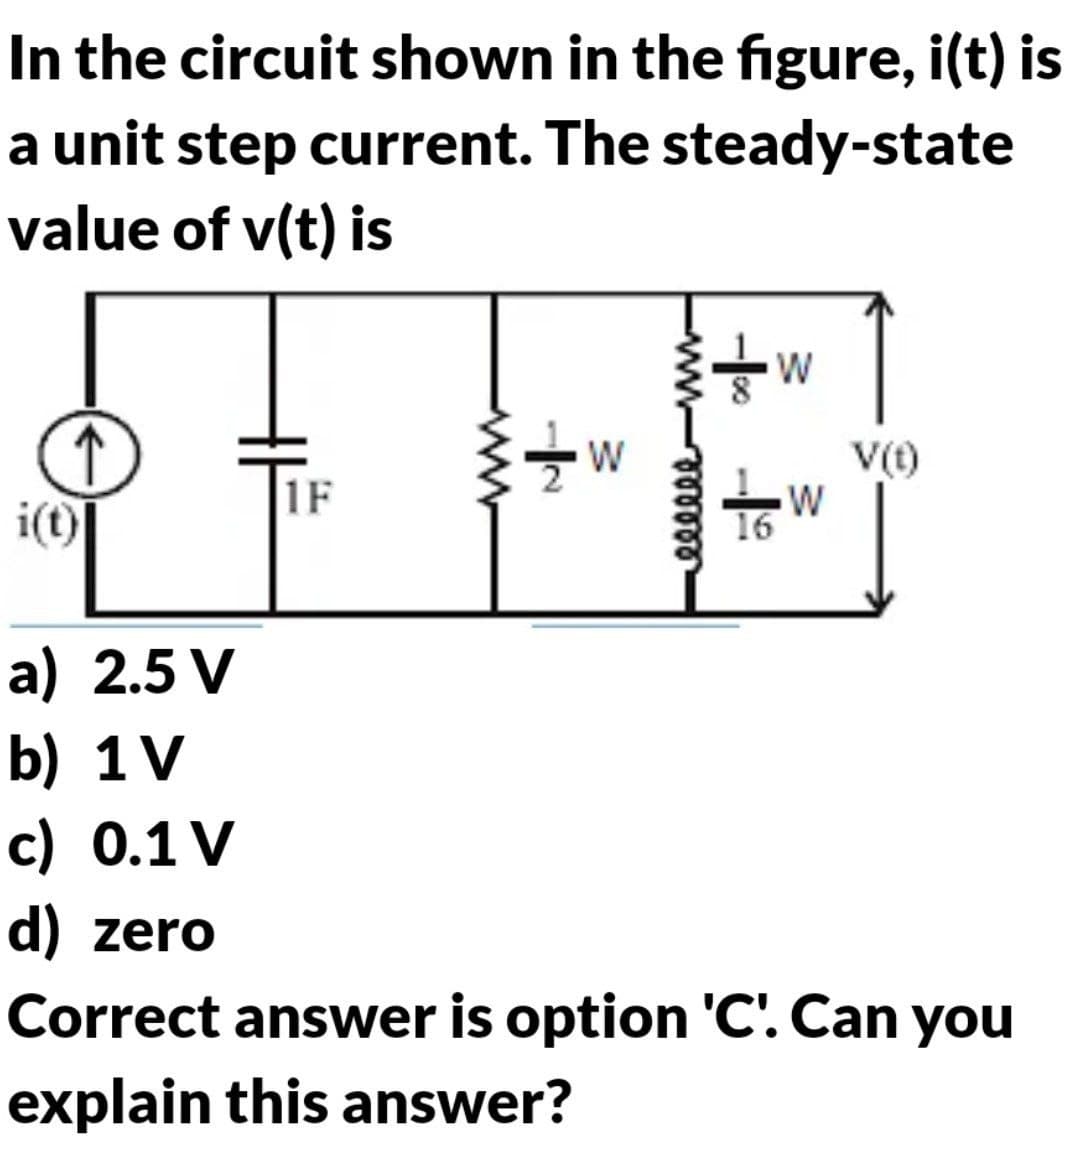 In the circuit shown in the figure, i(t) is
a unit step current. The steady-state
value of v(t) is
i(t)
a) 2.5 V
b) 1V
c) 0.1 V
d) zero
1F
wwww
W
eeeeee
-0-19
W
W
V(t)
Correct answer is option 'C'. Can you
explain this answer?